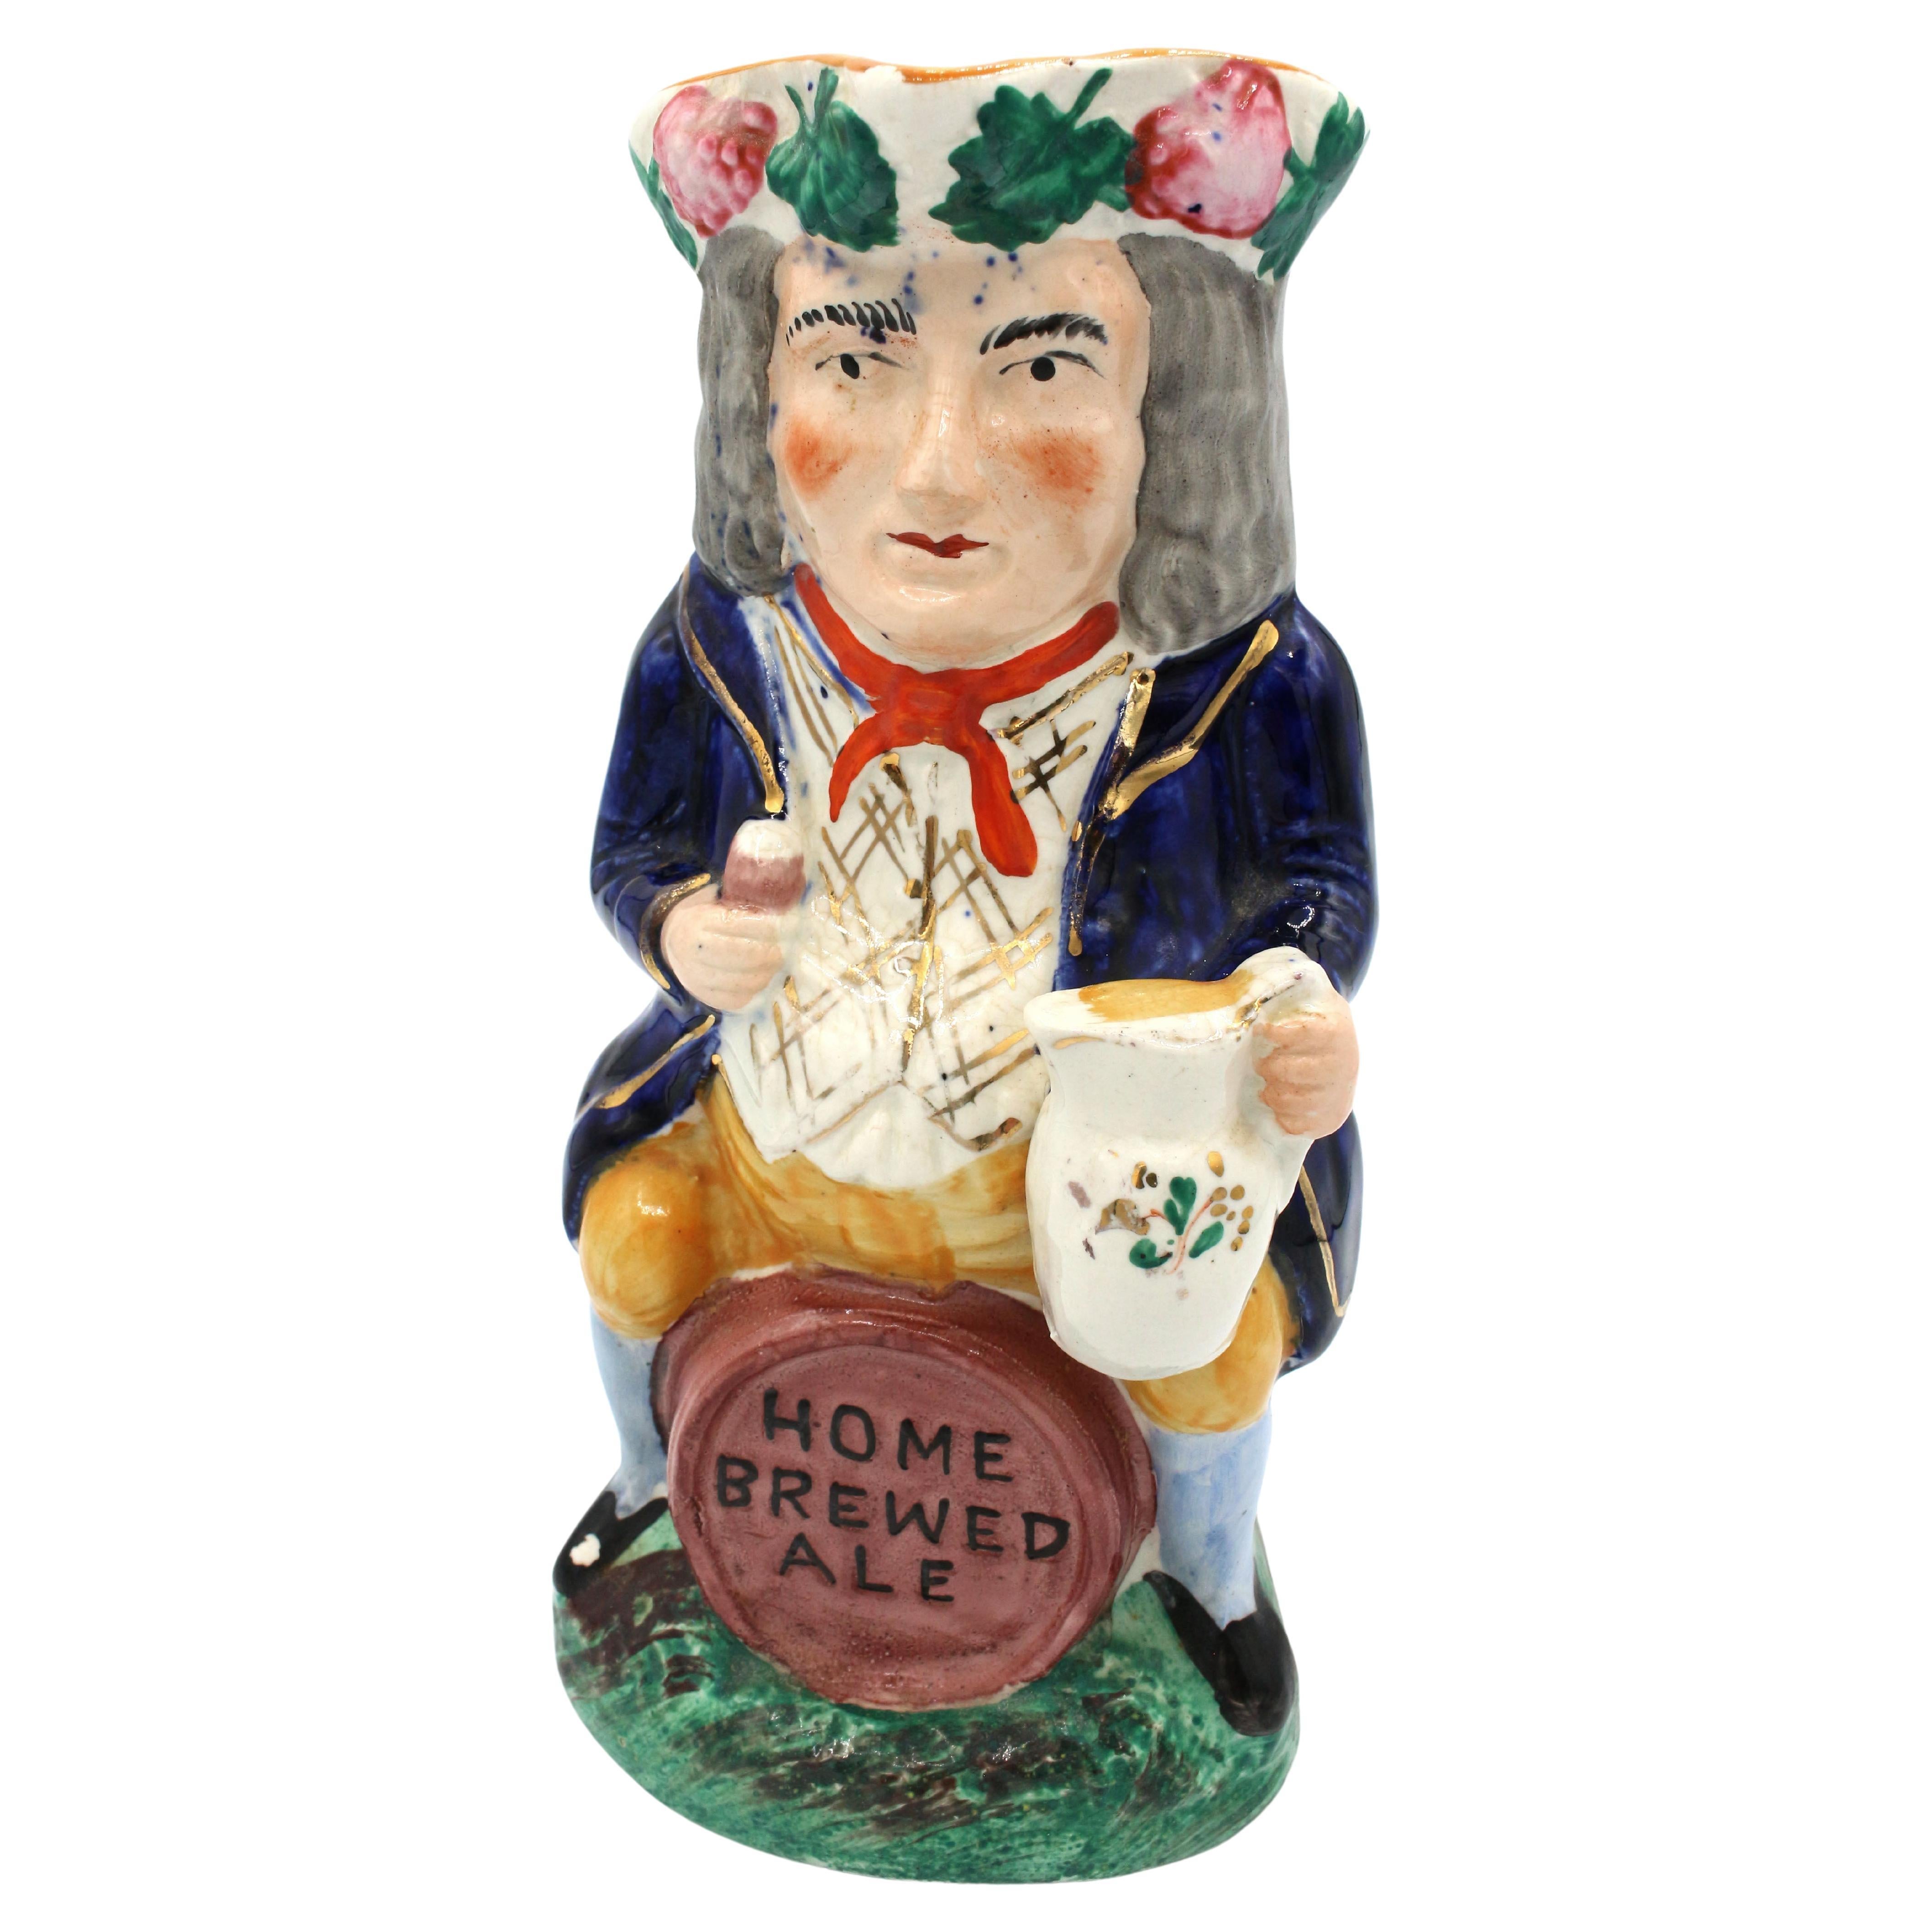 "The Landlord Toby" jug, circa 1860-80, Staffordshire, England For Sale